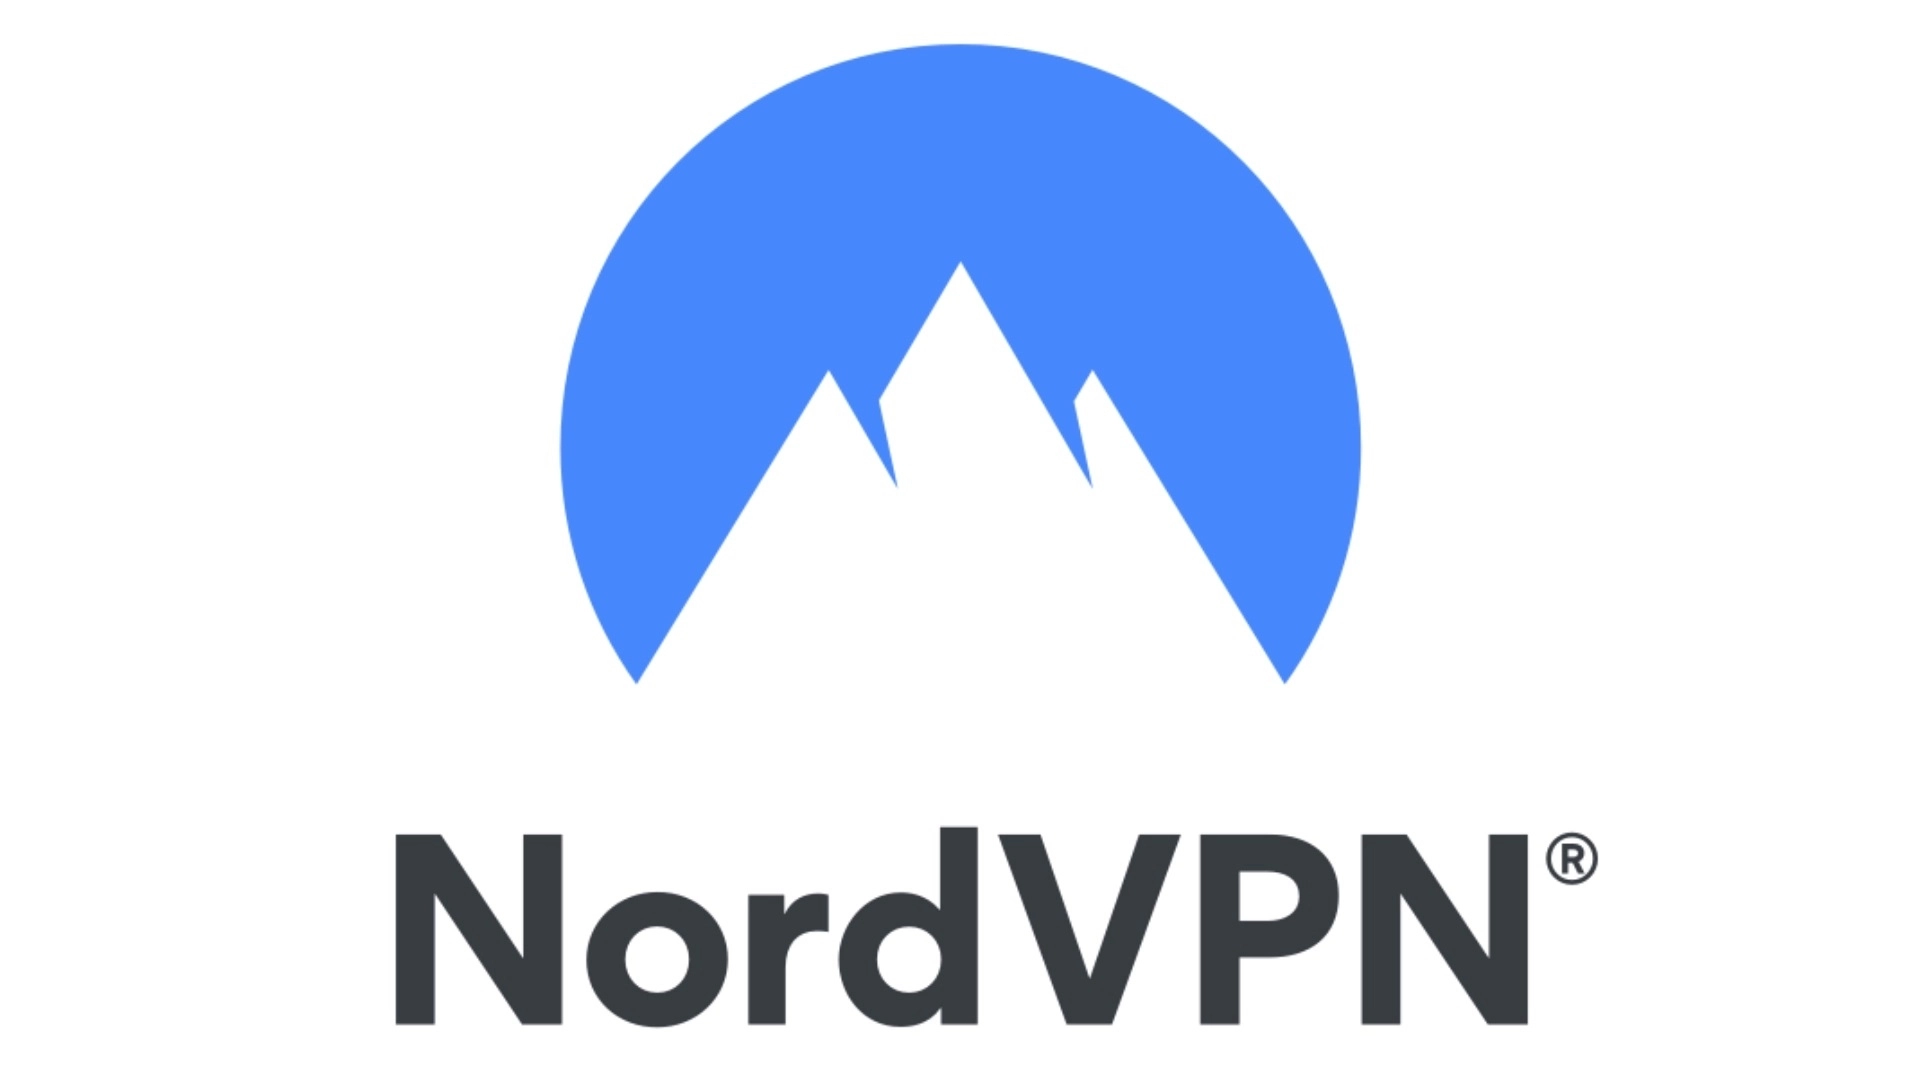 VPN servers for NordVPN.  The image shows the company logo.